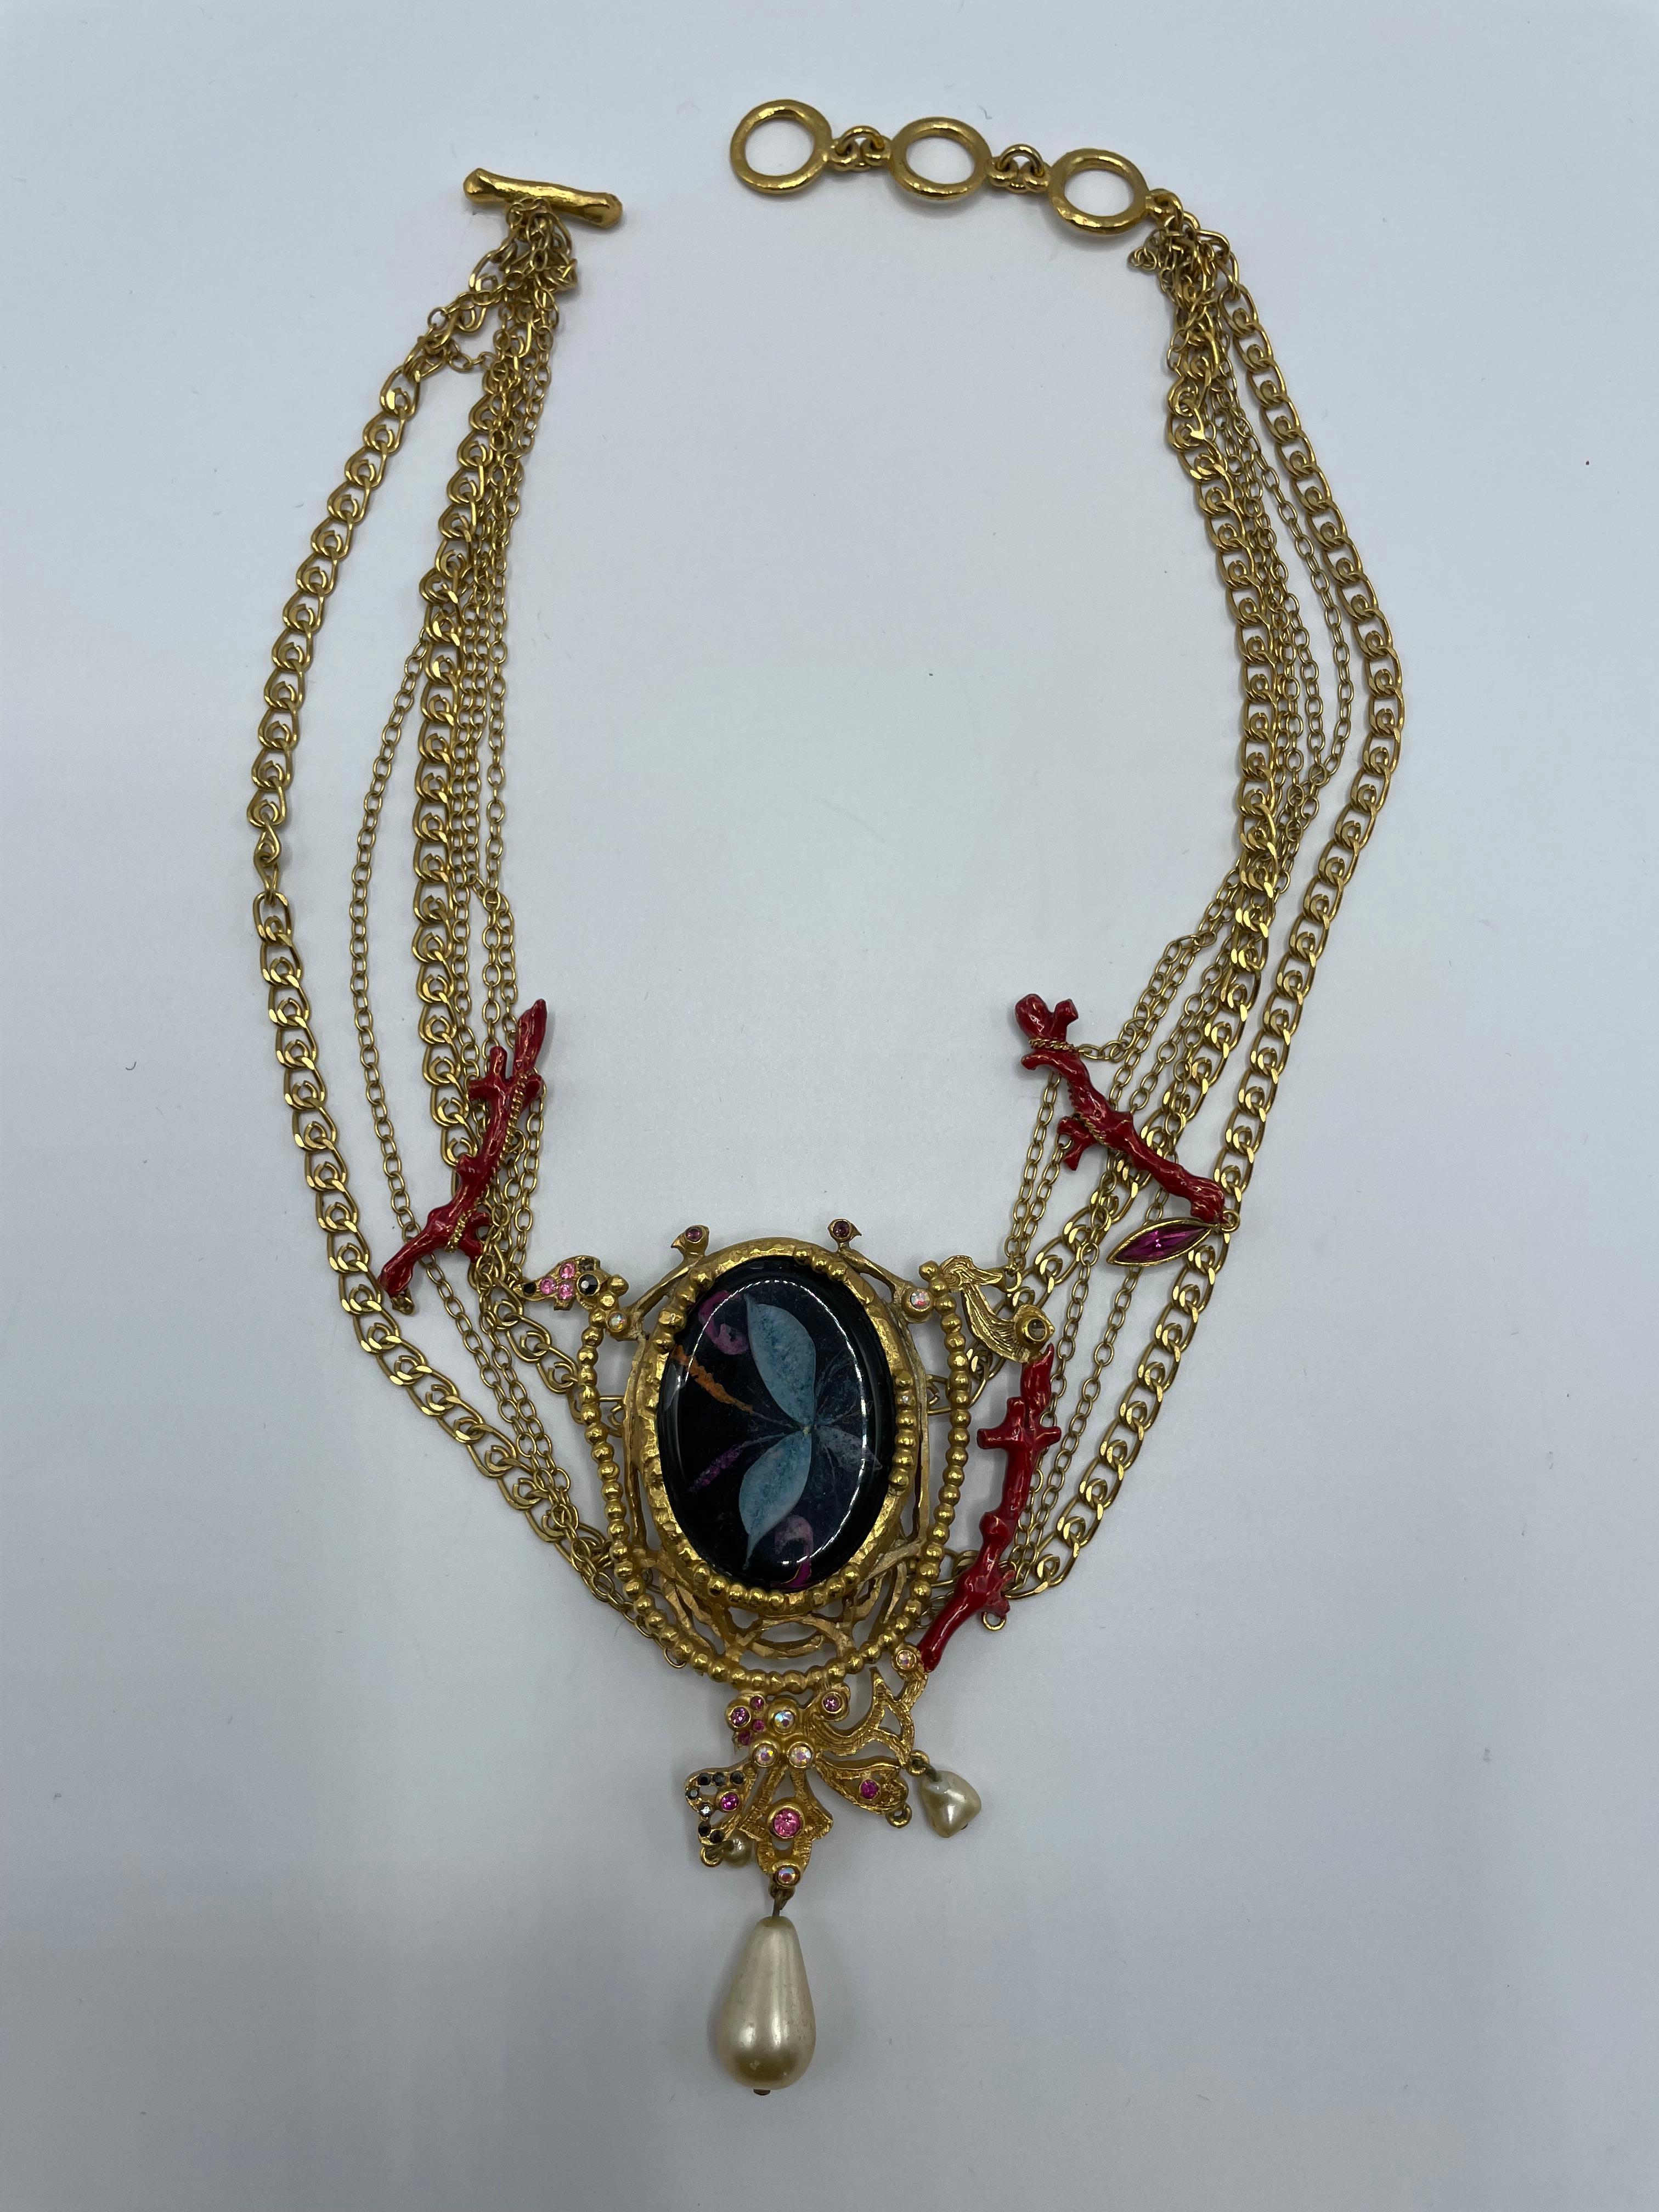 Spectacular necklace of Christian Lacroix. Central medaillon, faux perle and faux coral. Big CL signed on the back, stamp Christian Lacroix Made in France. Very impressive artistic work.